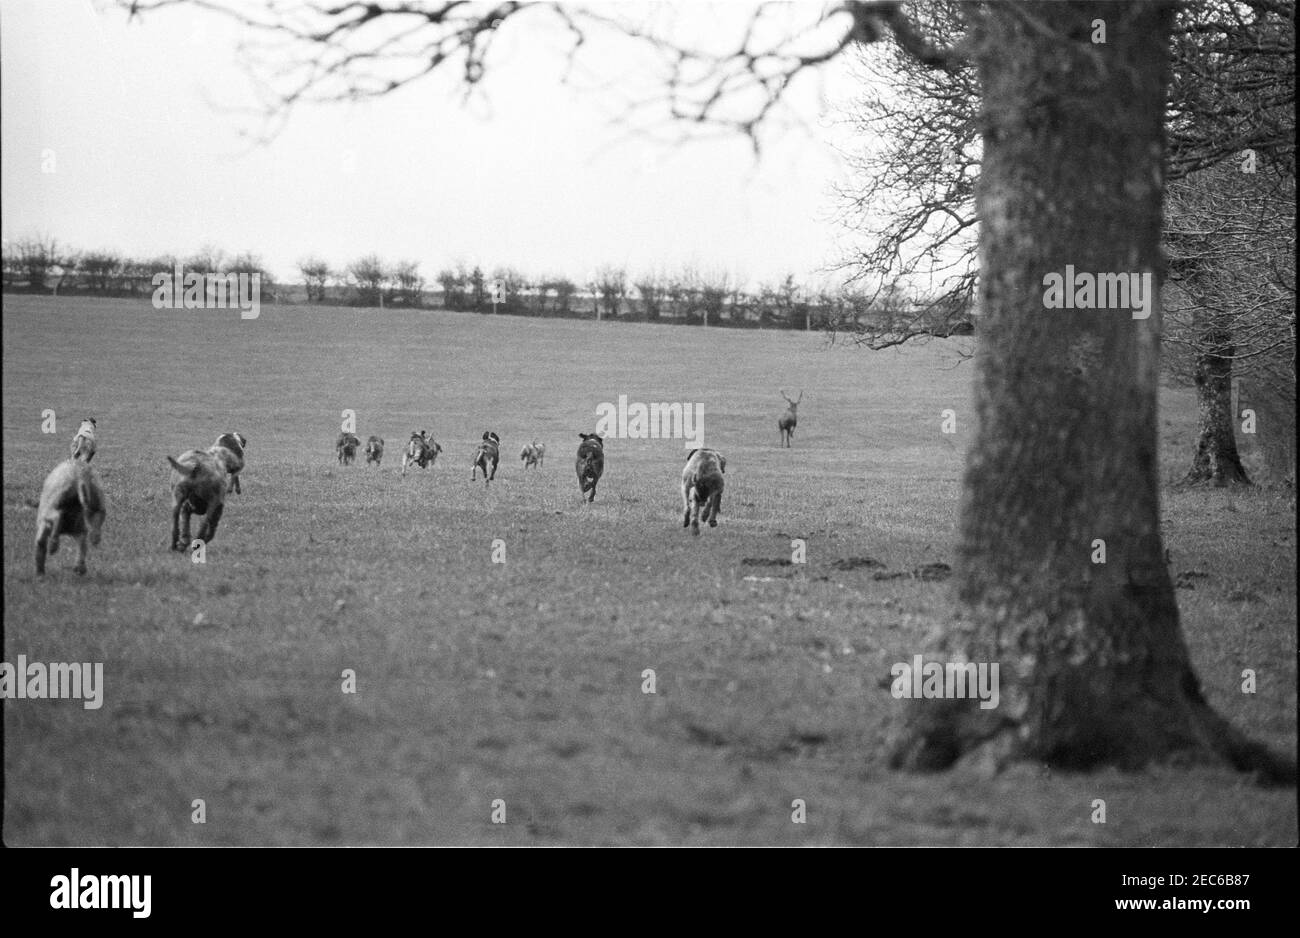 Tiverton Staghounds February 26th 1983. The tiring stag flees from hounds. This was long before the Hunting Act 2004 that banned this pastime on grounds of cruelty. Stock Photo